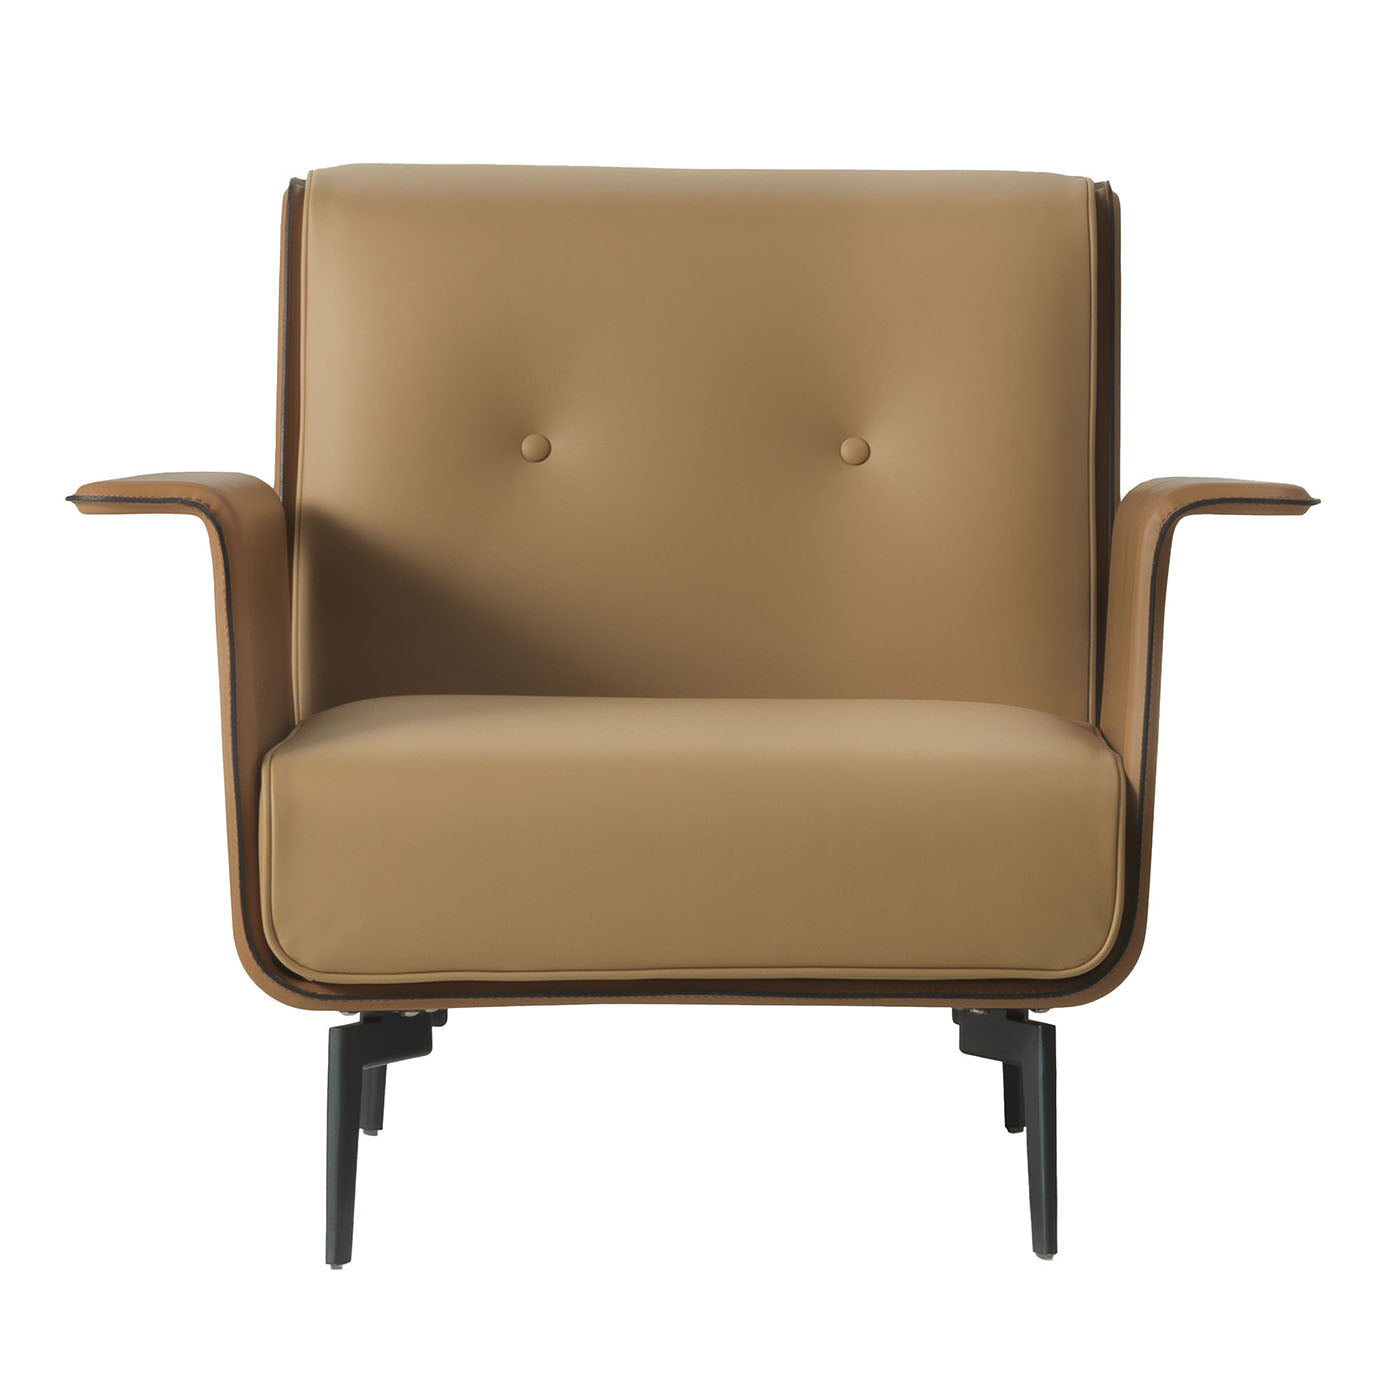 Vinci Soft-Brown Leather Armchair - Main view